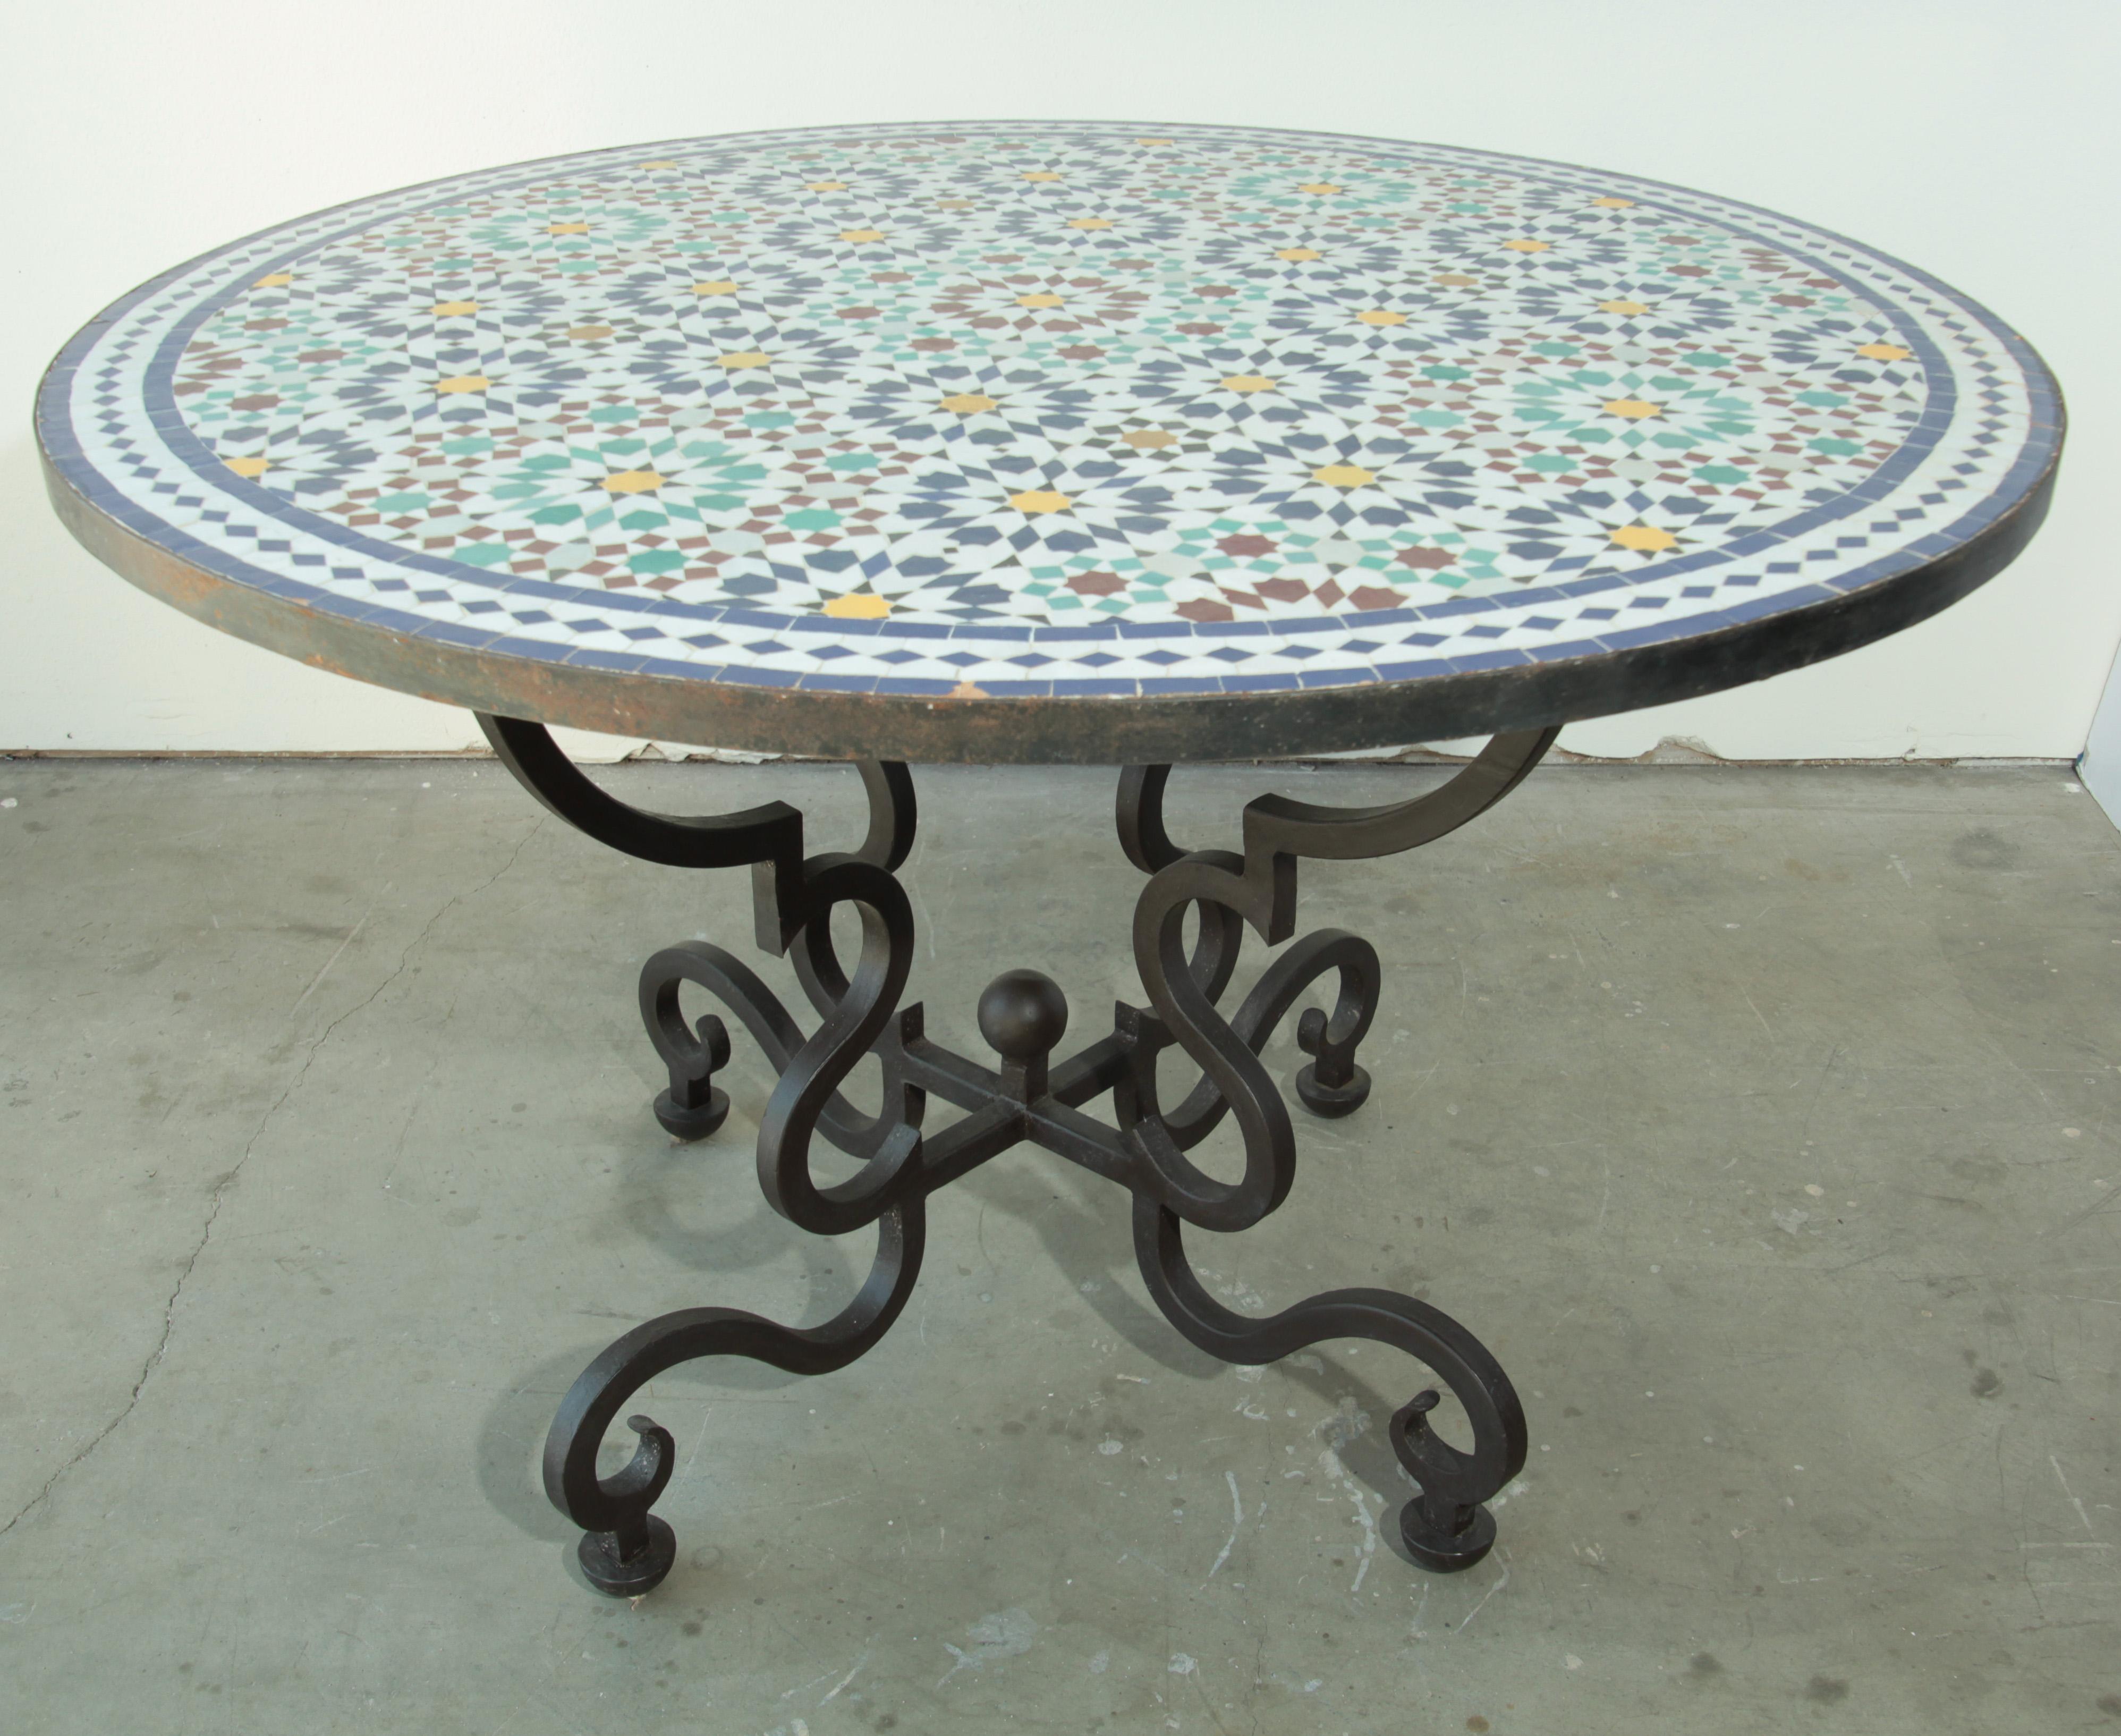 Moroccan round mosaic tile table delicately handcrafted by expert artisans in Fez, Morocco, using reclaimed old glazed tiles inlaid in concrete with traditional Islamic Moorish geometrical design in white, blue, red, green and aqua colors.
Moroccan